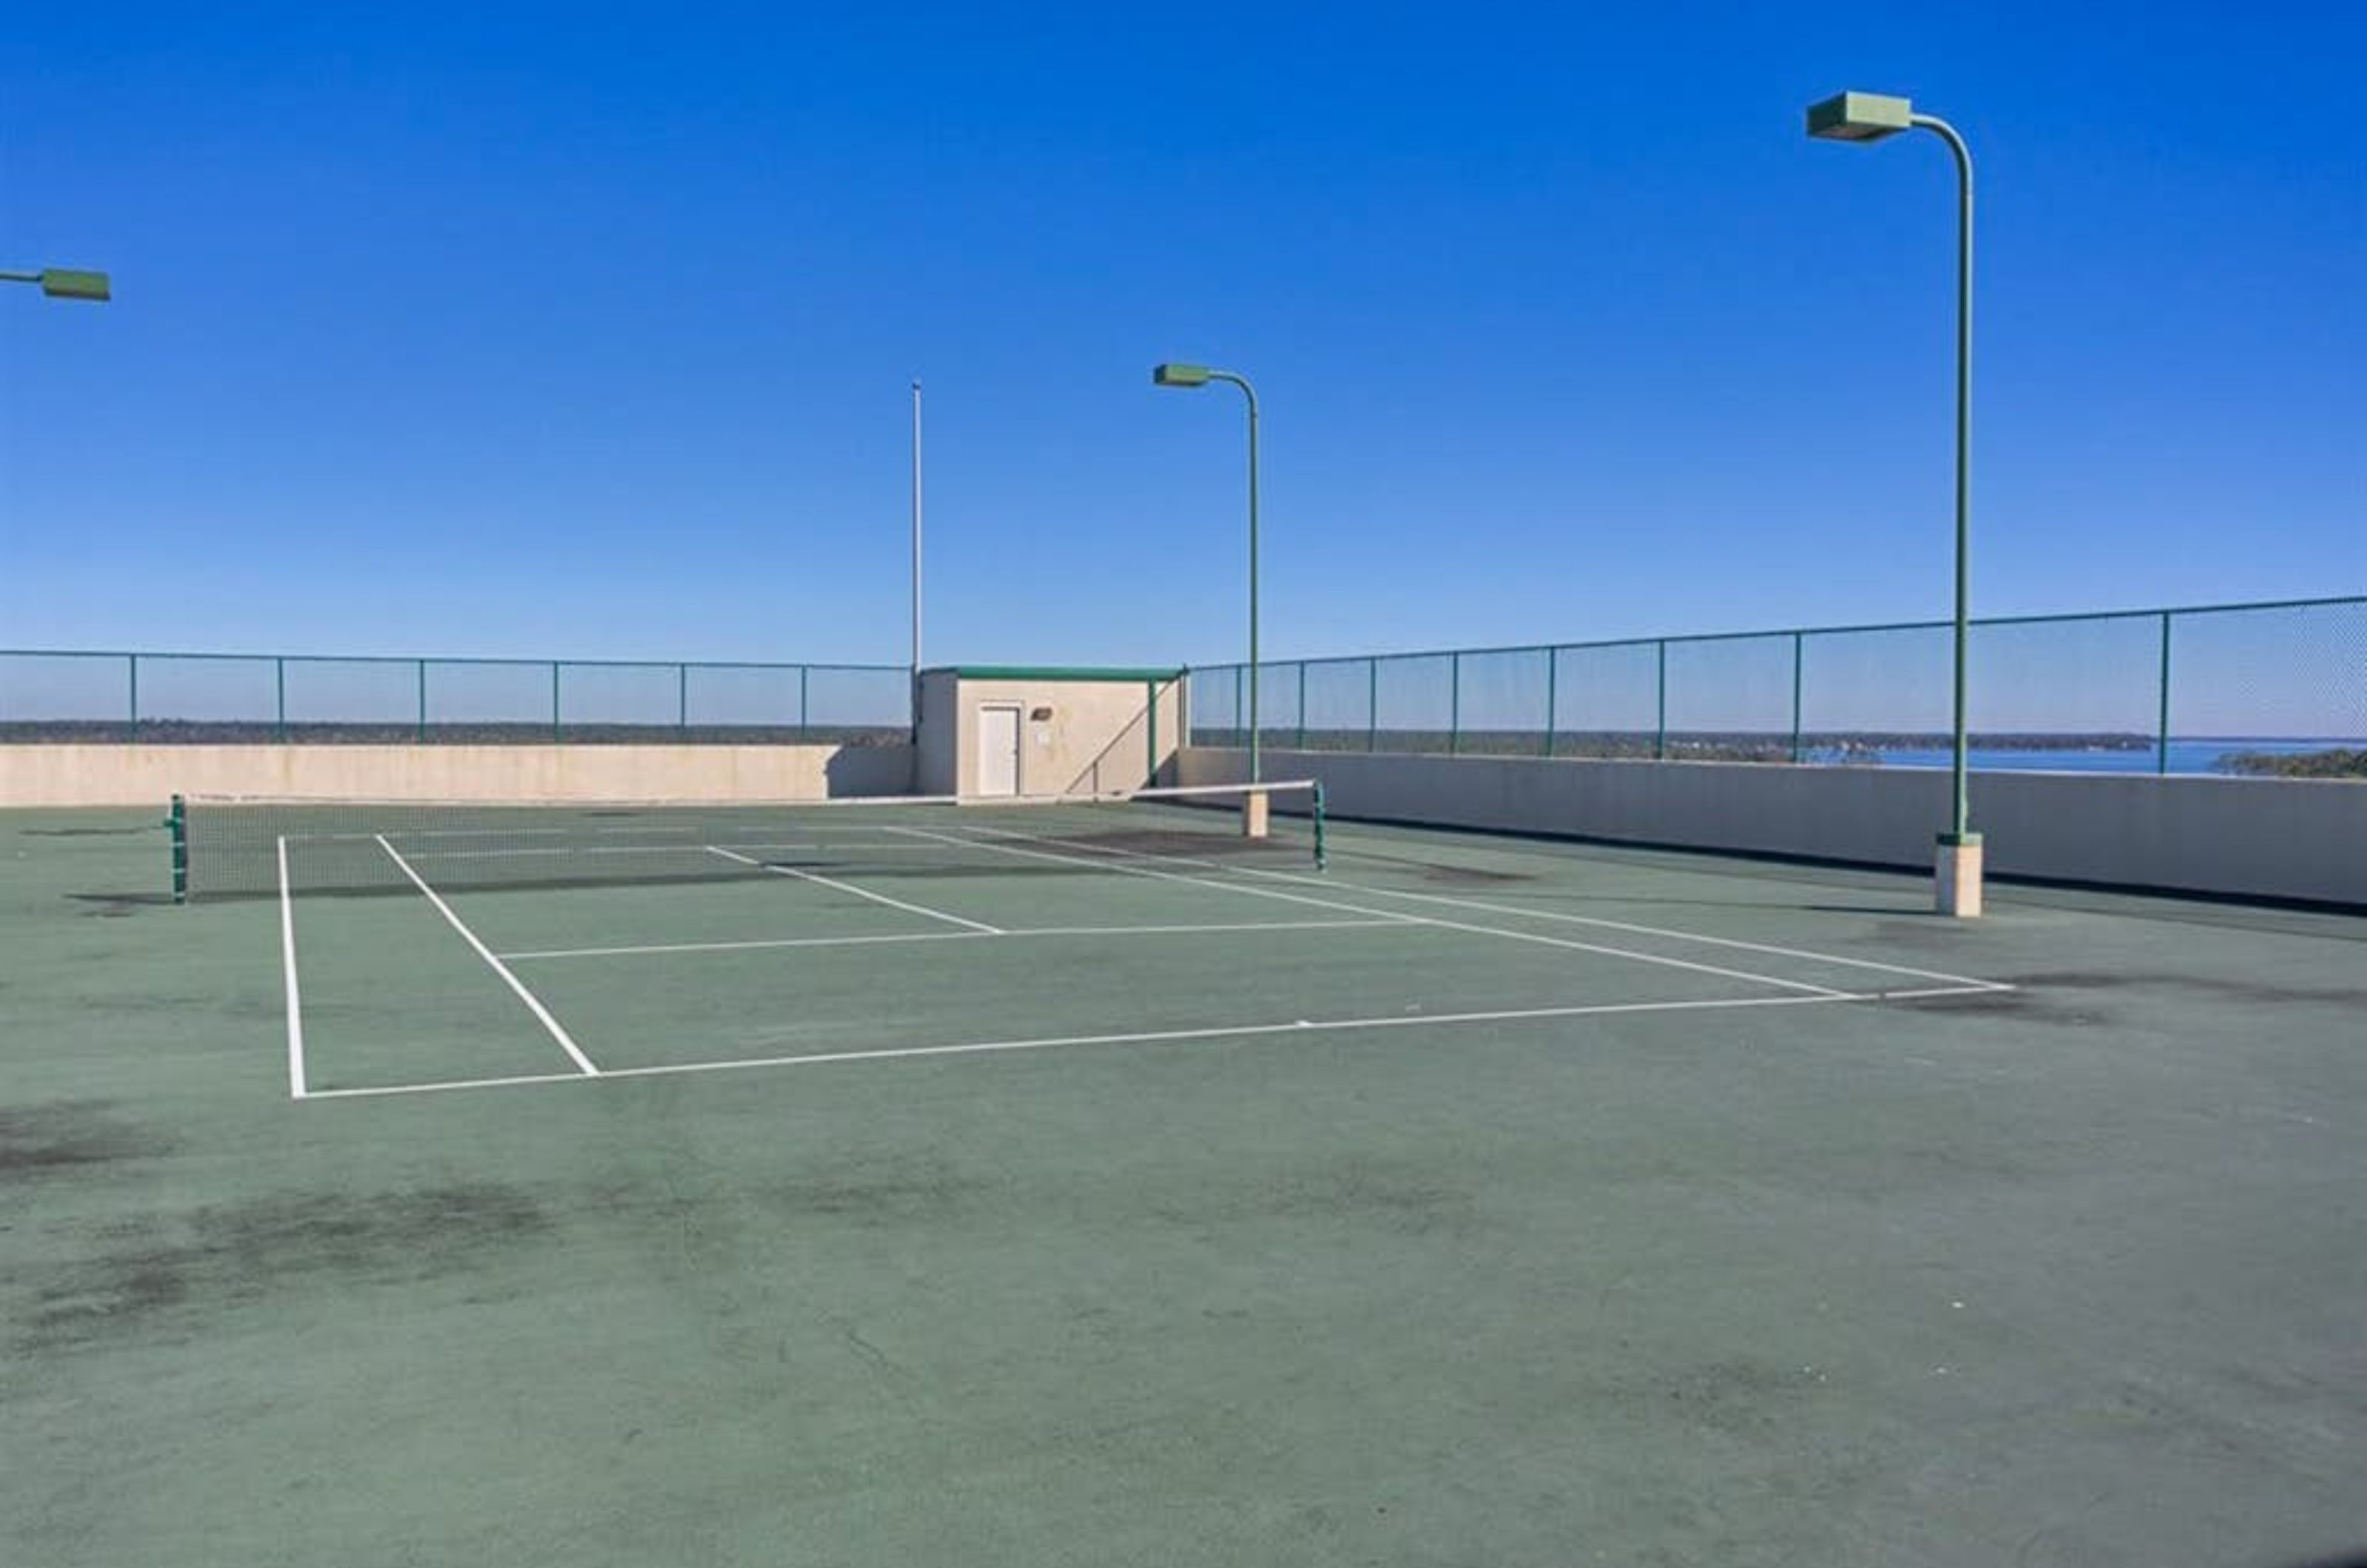 The outdoor tennis courts at Phoenix on the Bay